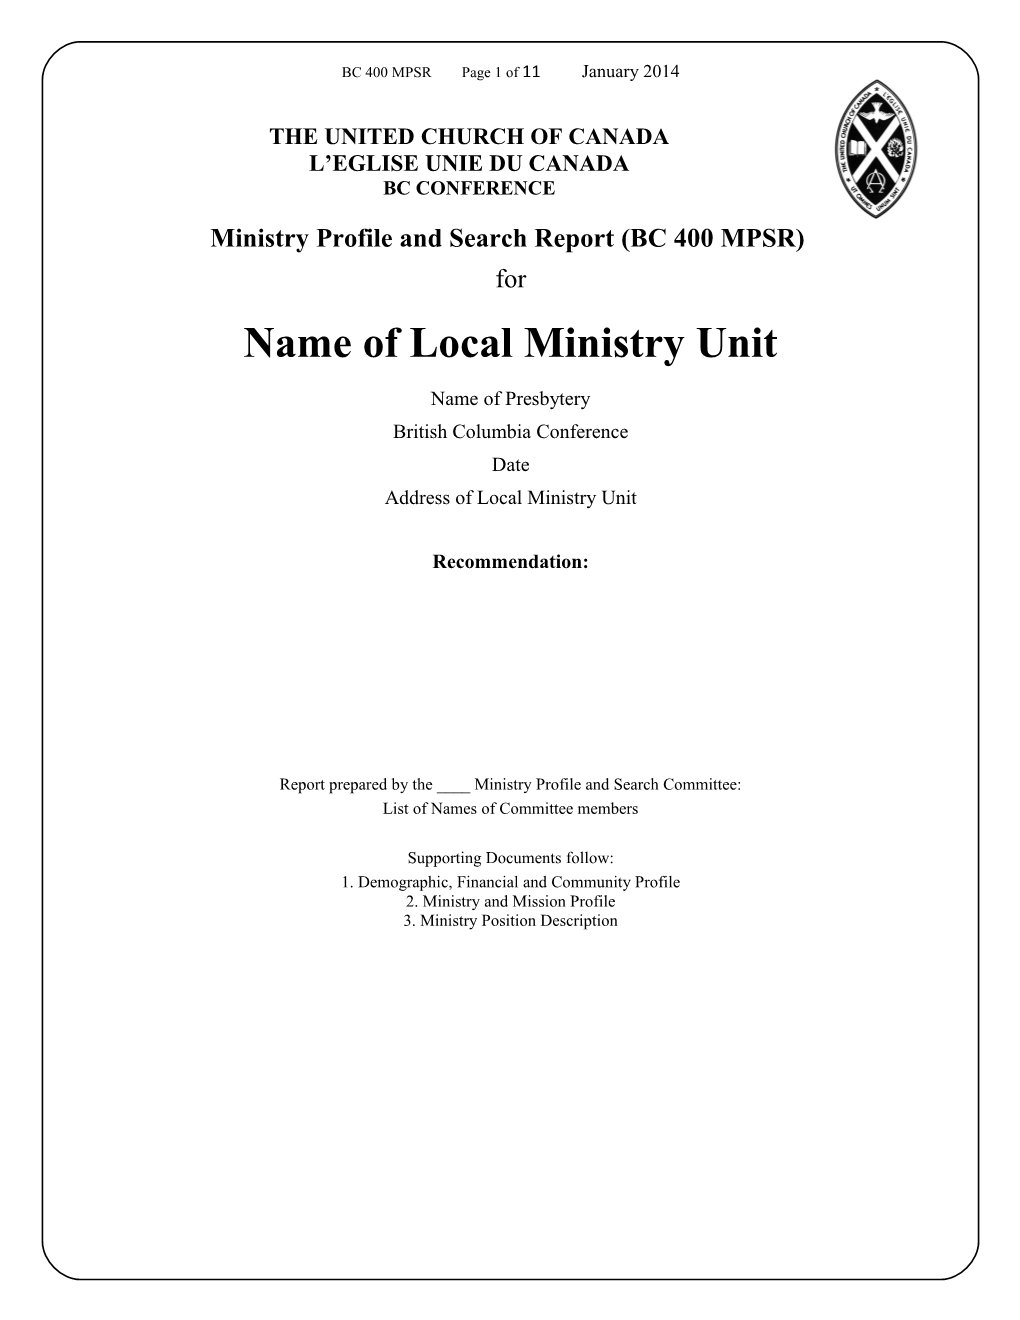 LOCAL MINISTRY-TORONTO CONFERENCE-Form-Demographic Financial and Community Profile